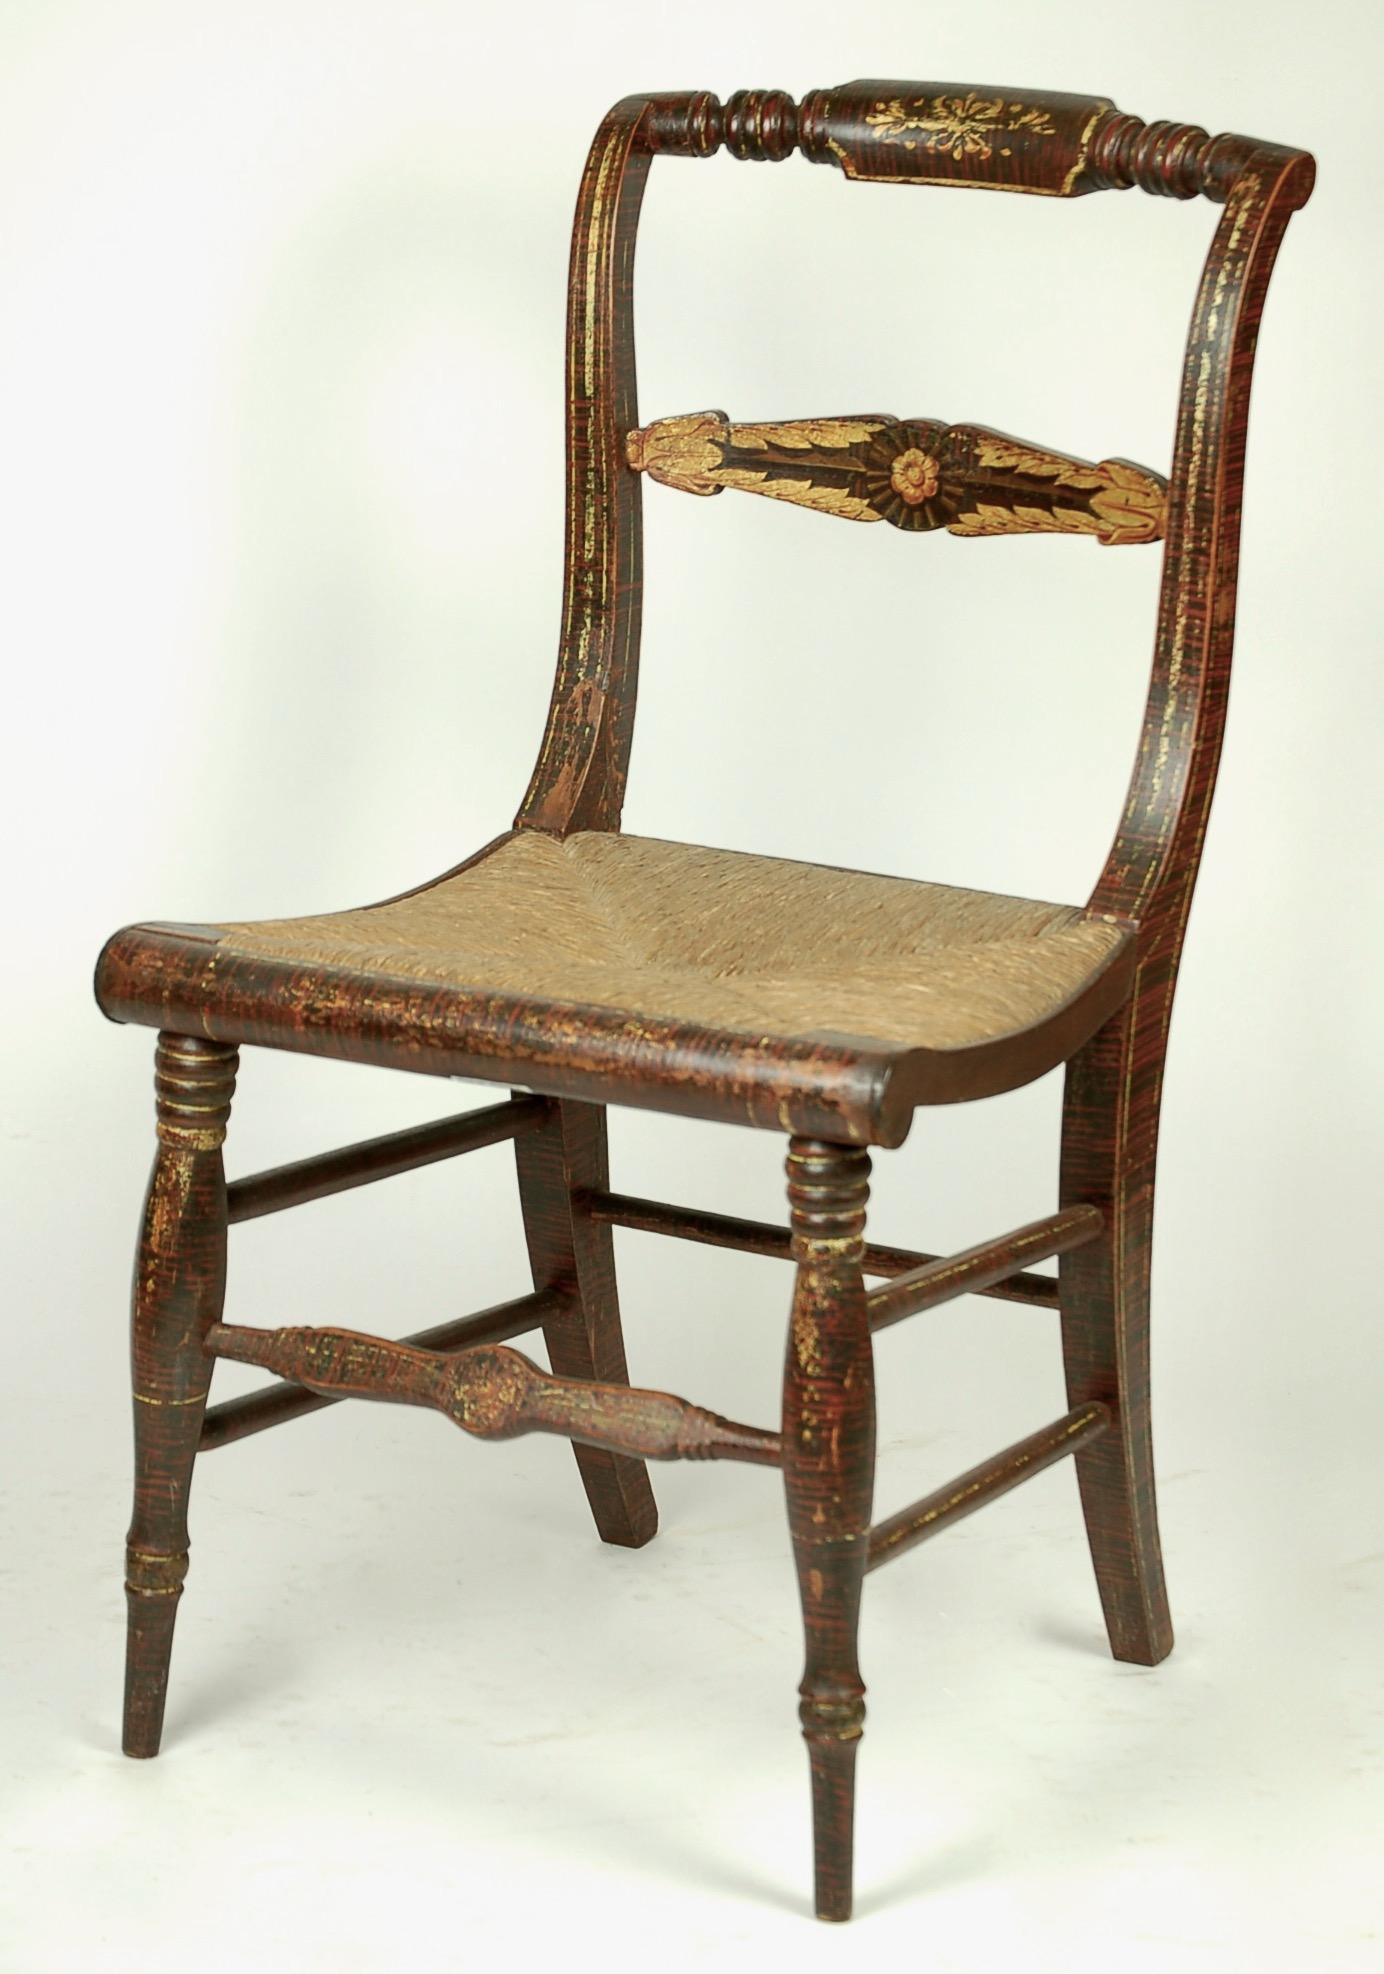 1984.4 rosewood-grained side chair